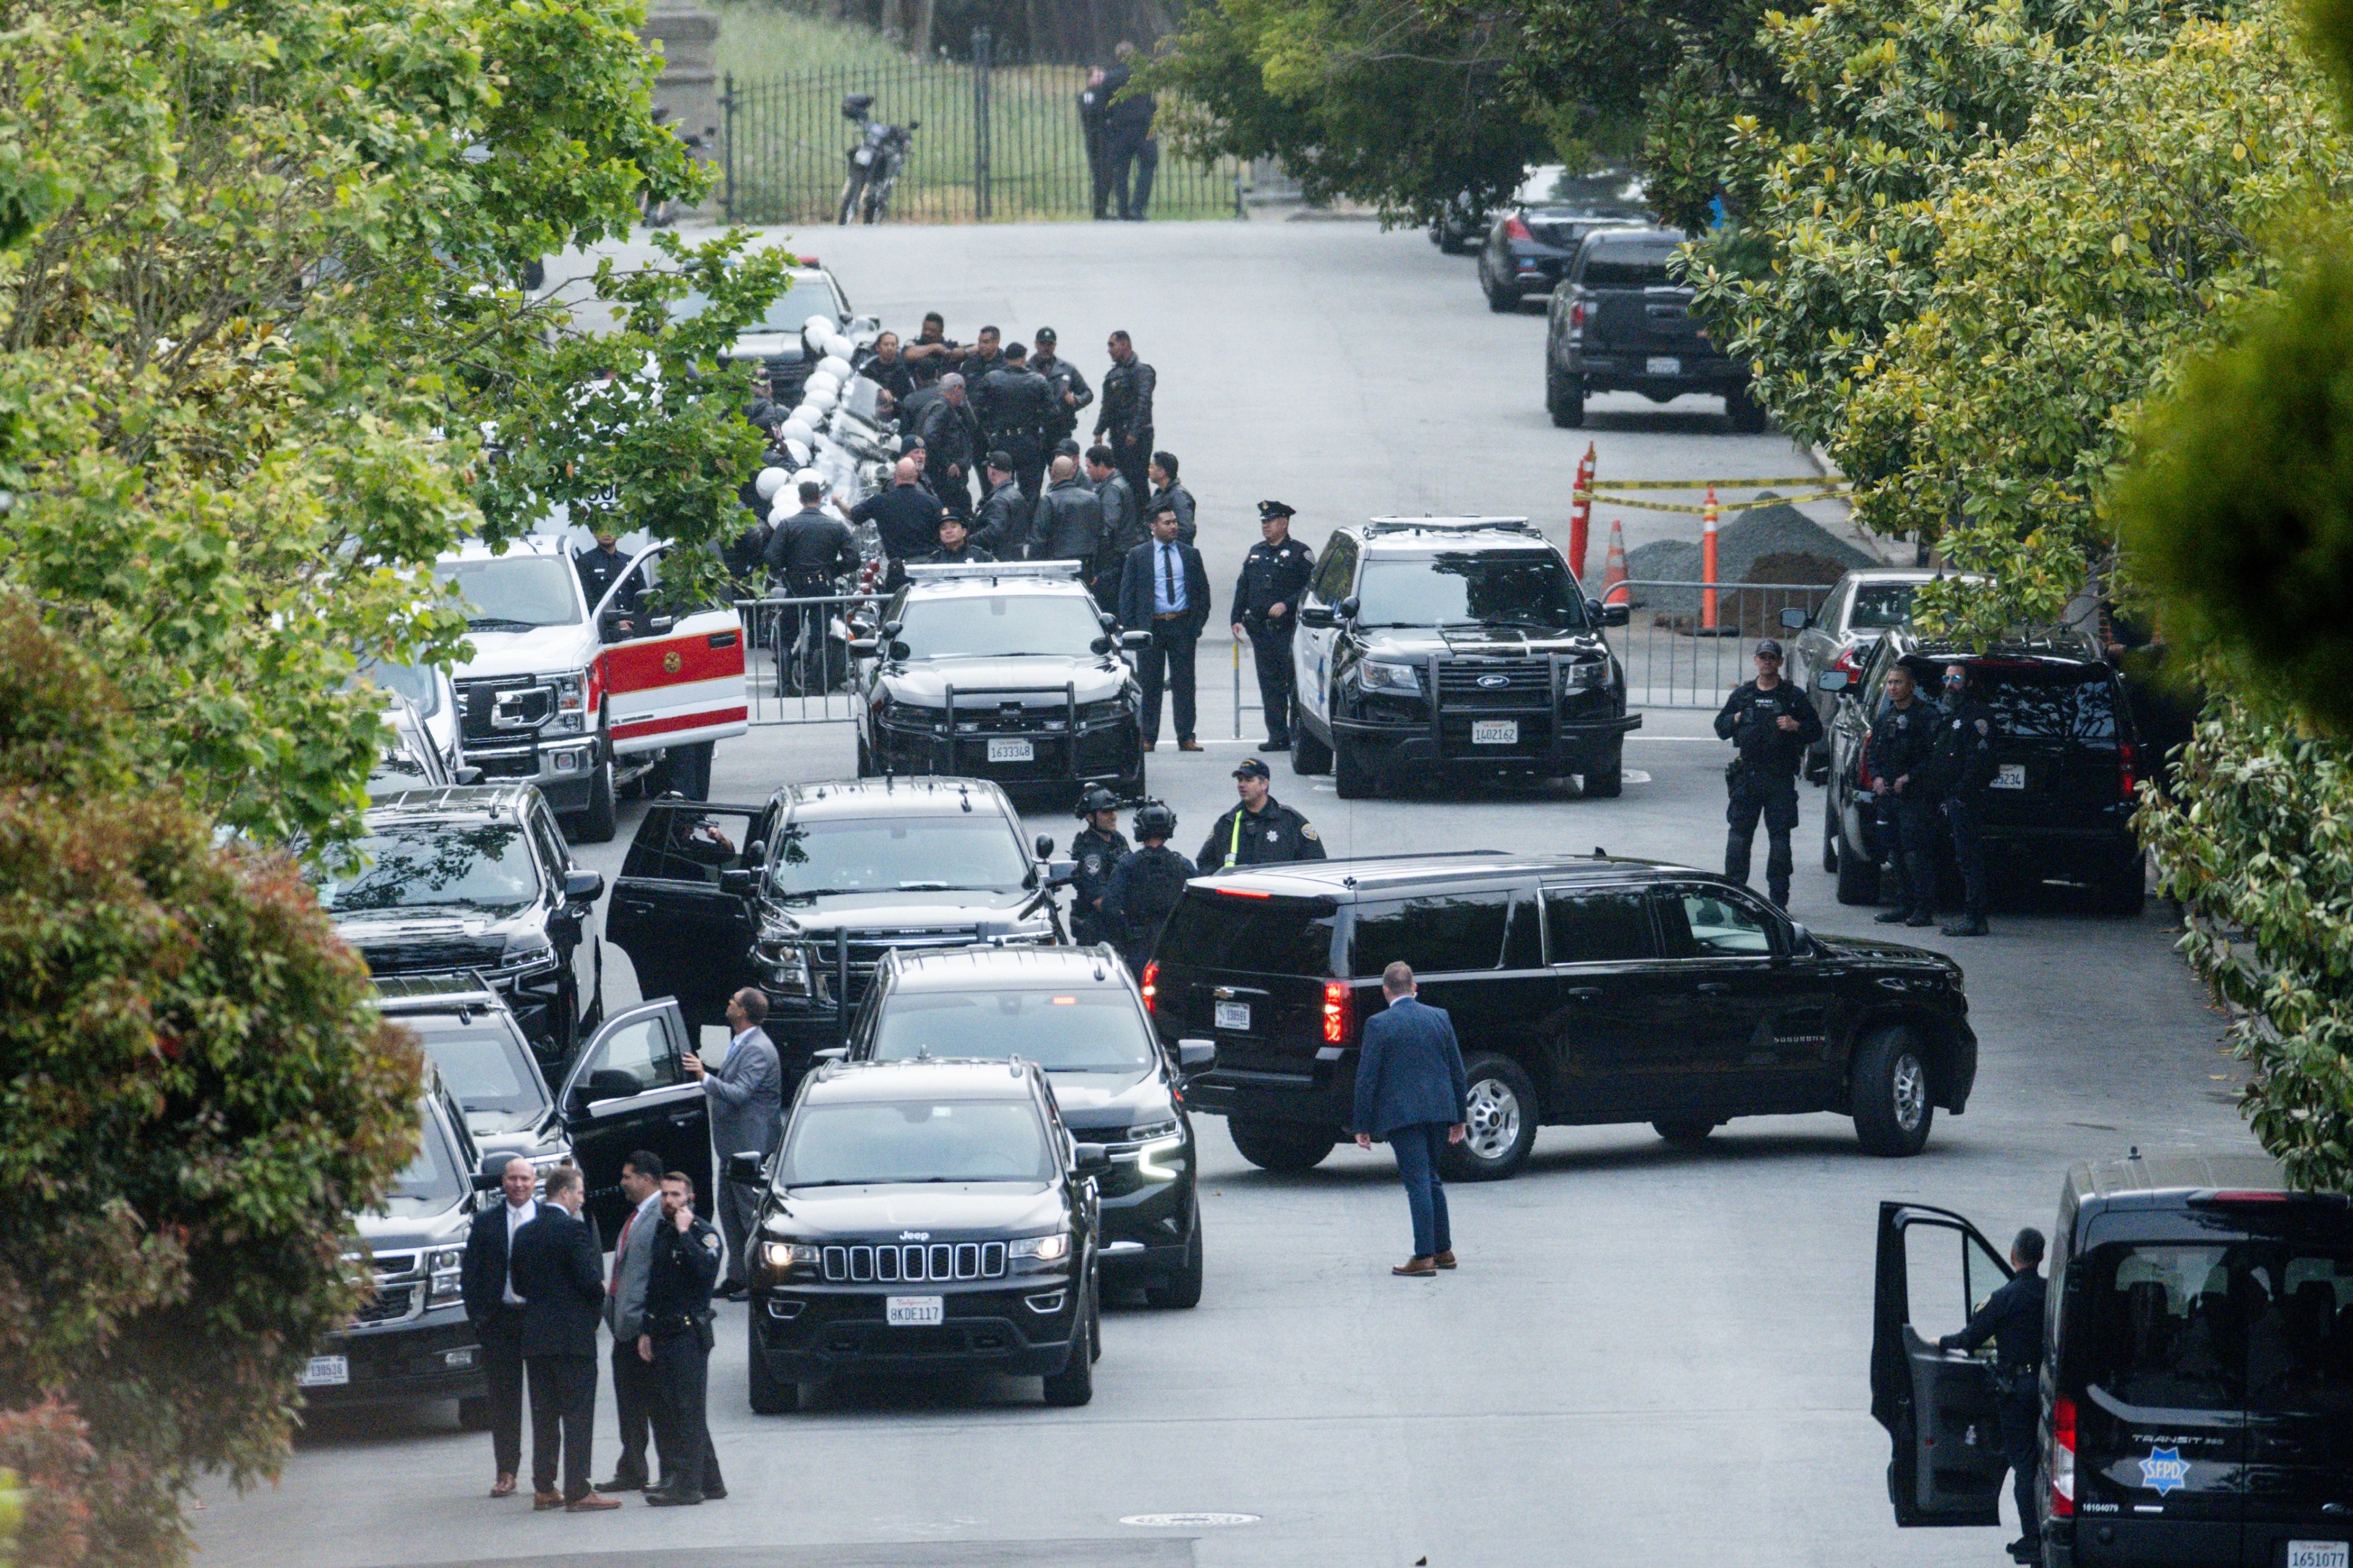 A large group of police officers and security personnel surround several black SUVs on a tree-lined street, creating a visible security detail.